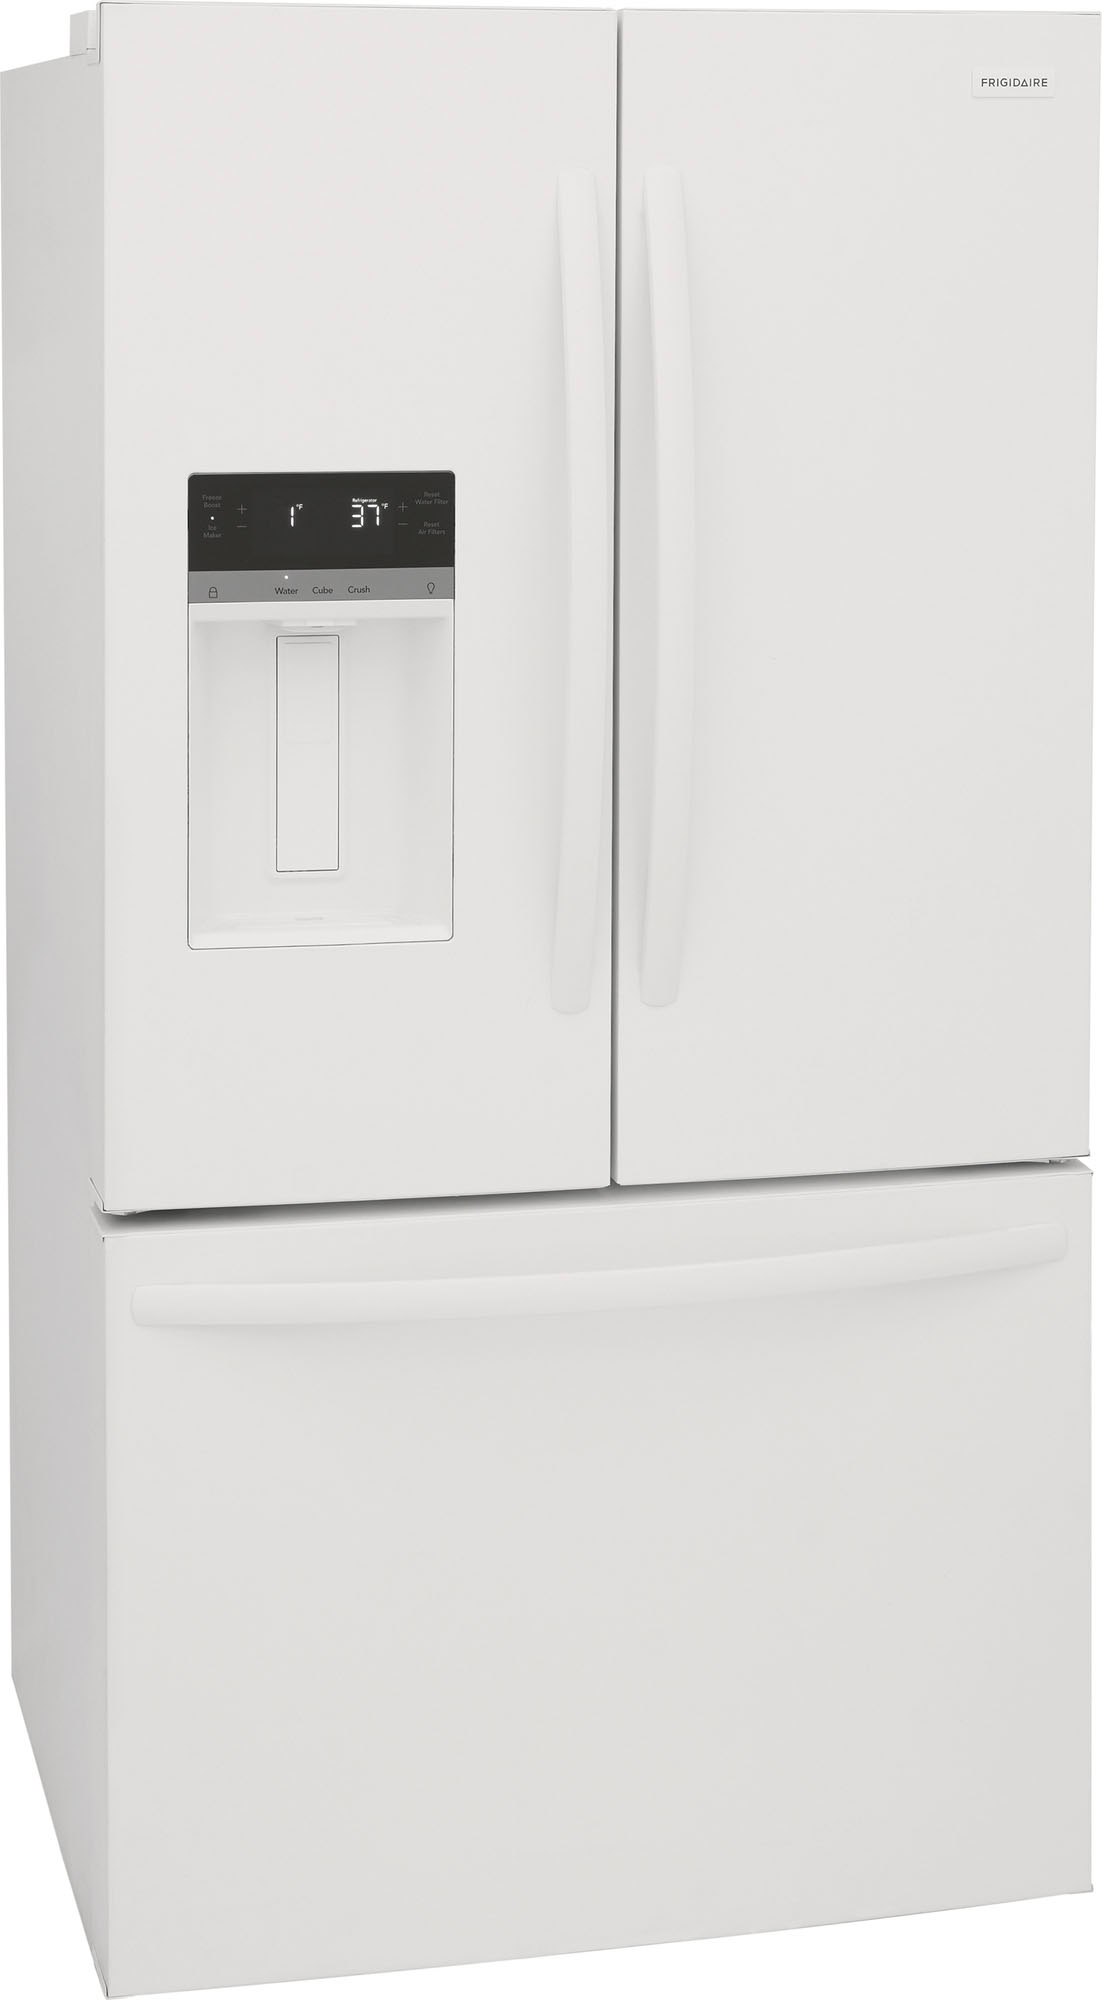 Frigidaire 27.8-cu ft French Door Refrigerator with Ice Maker